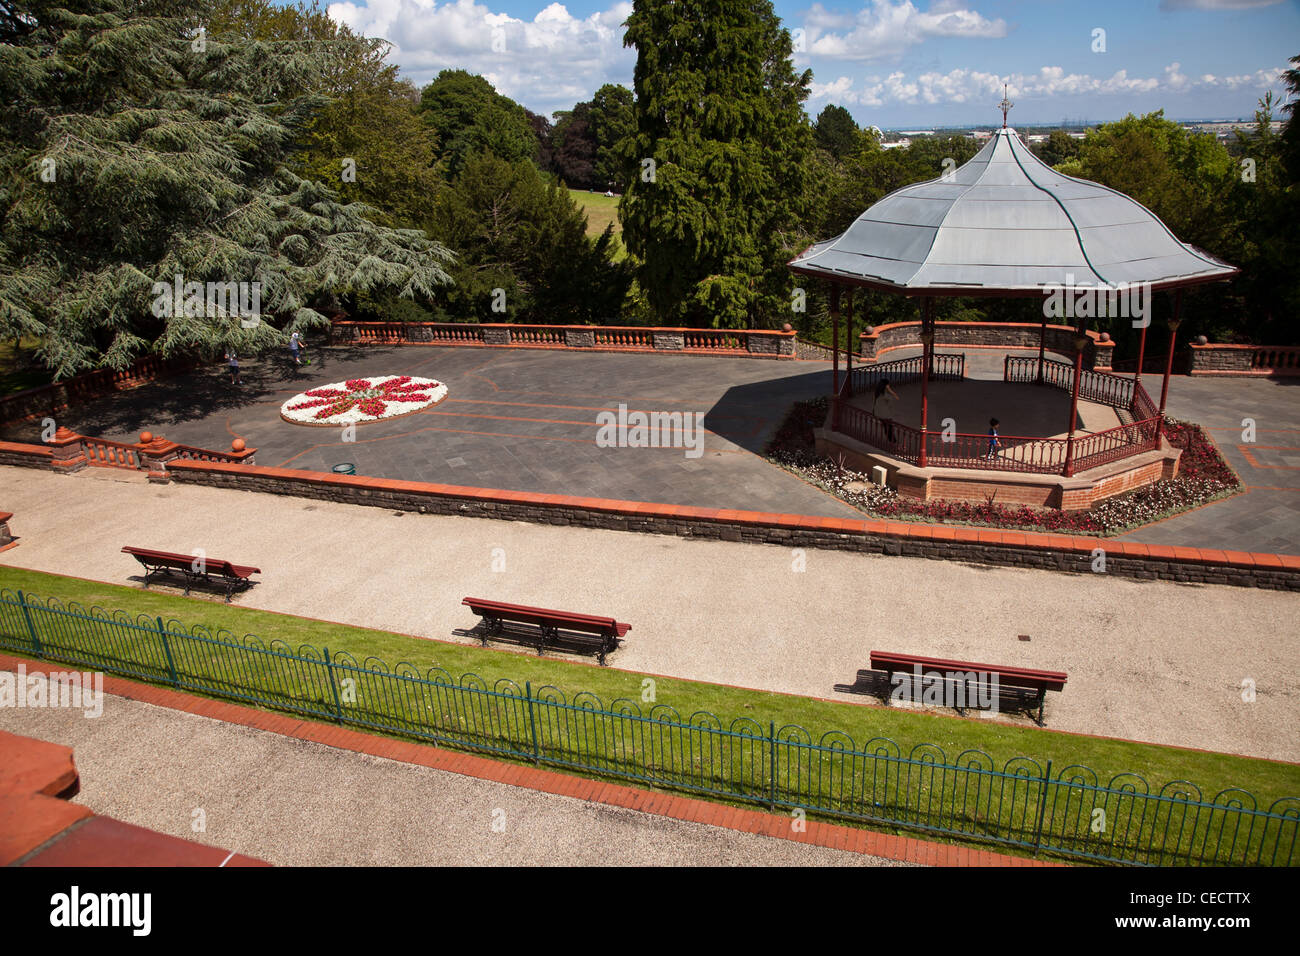 Bandstand in park for open air concerts, Belle vue park , newport, south wales, uk Stock Photo